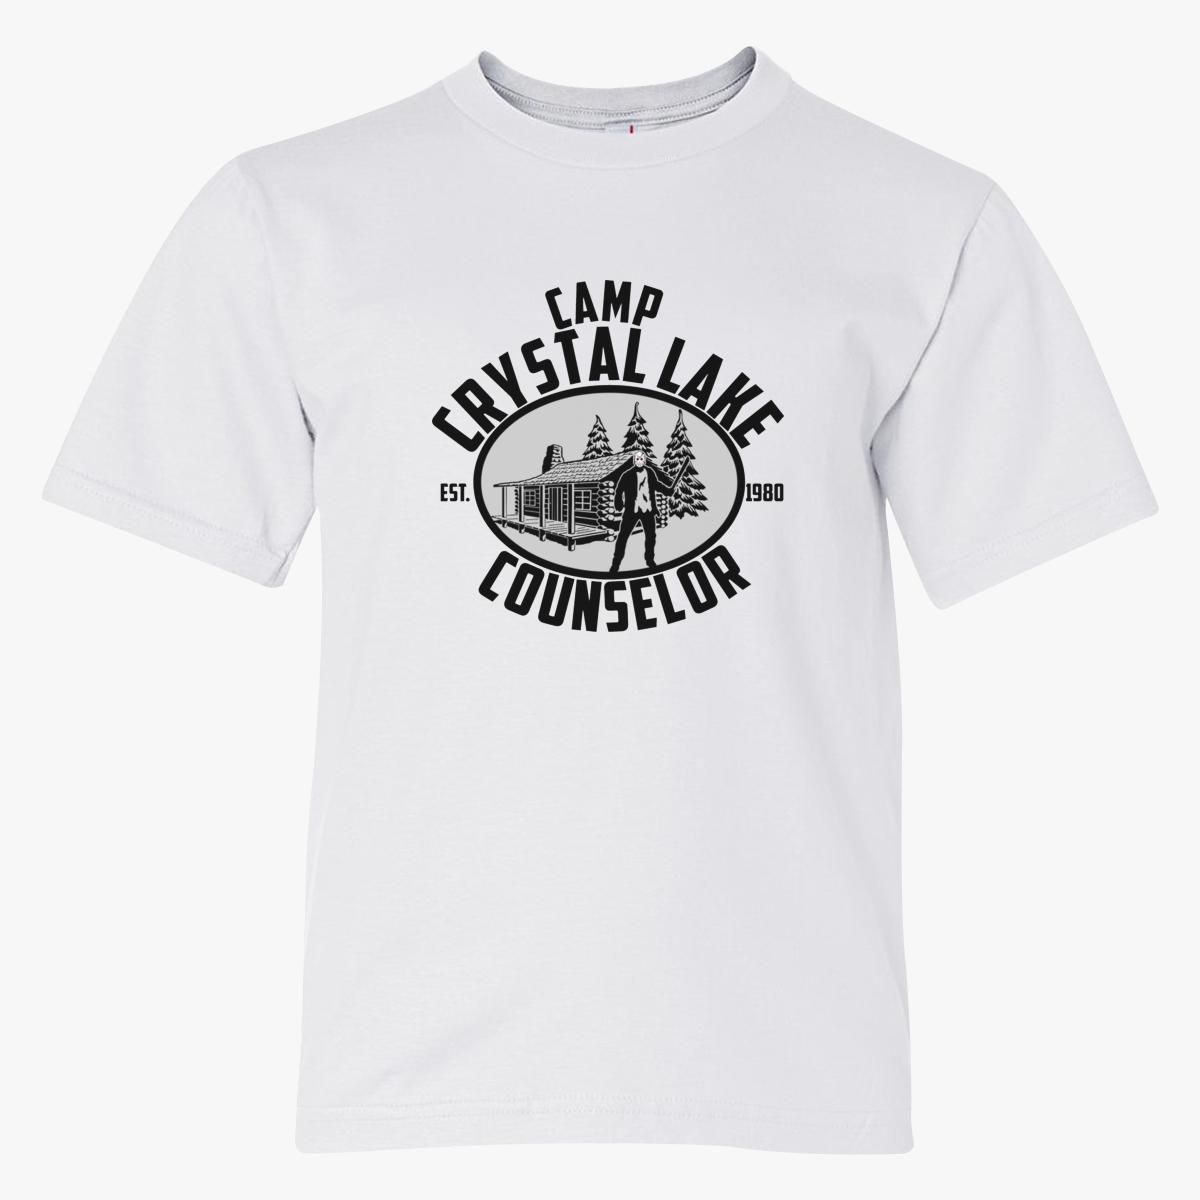 Camp Crystal Lake Counselor Est. 1980 Youth T-shirt - Customon